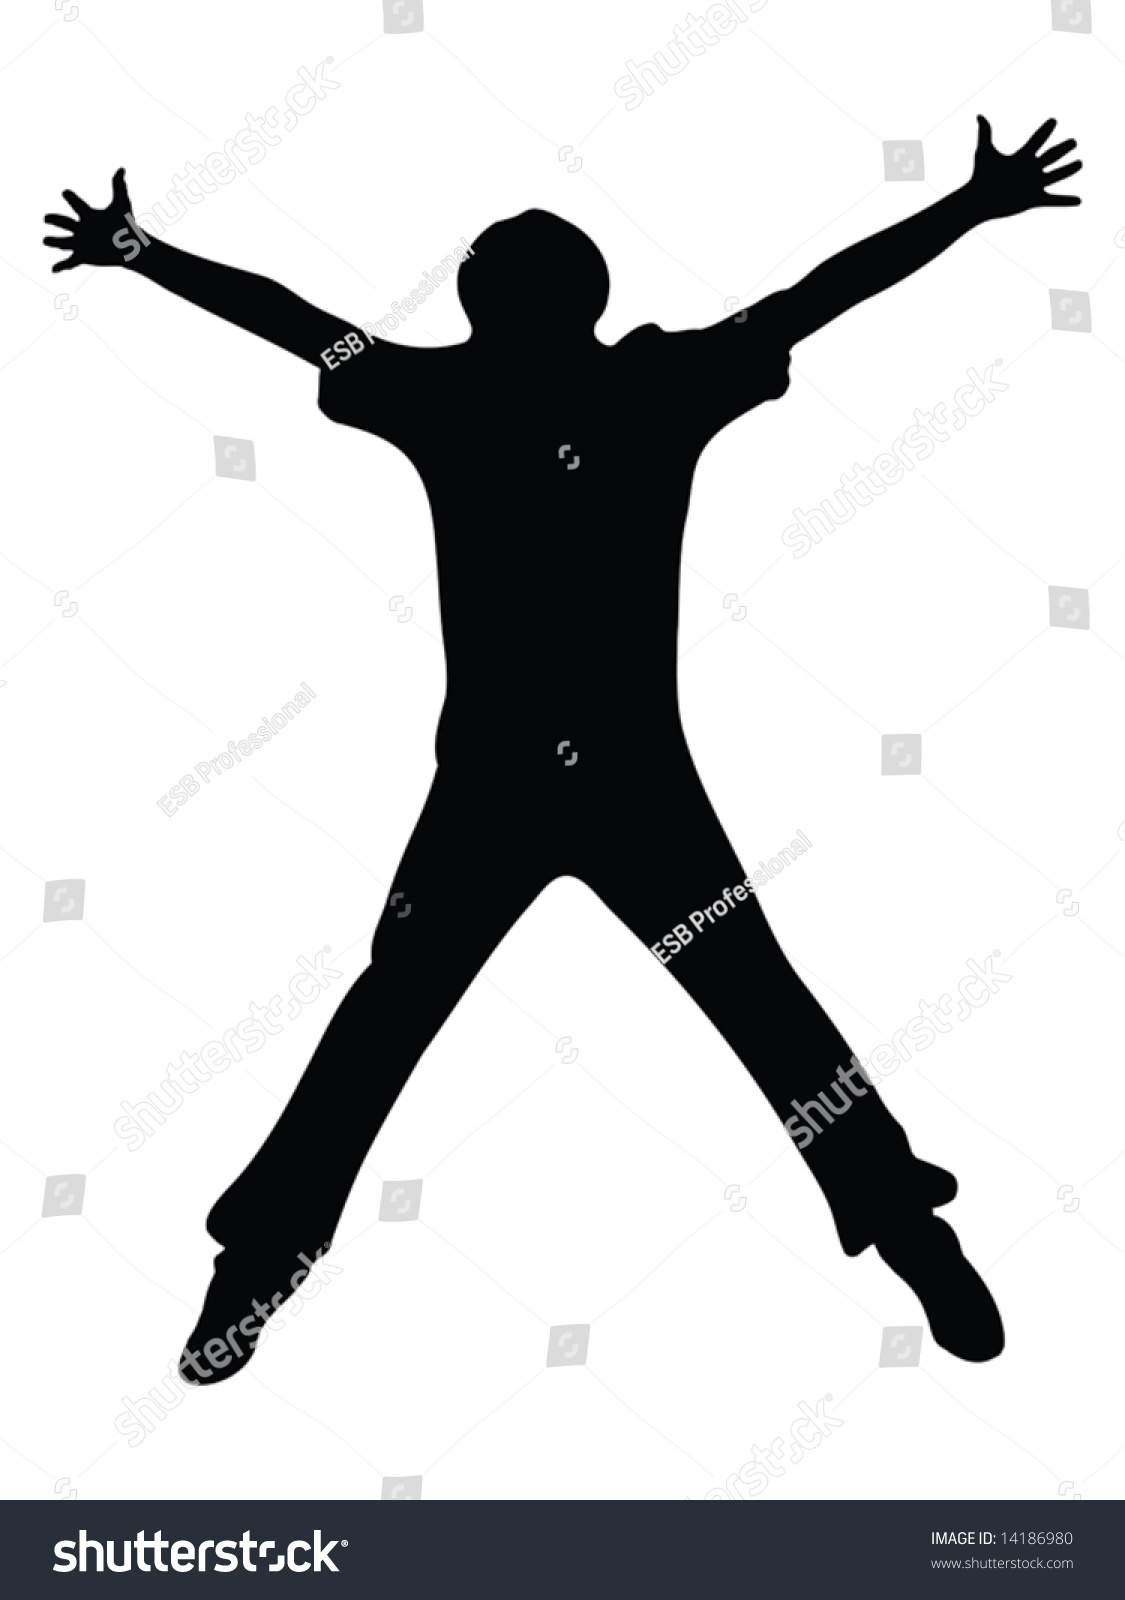 person jumping for joy